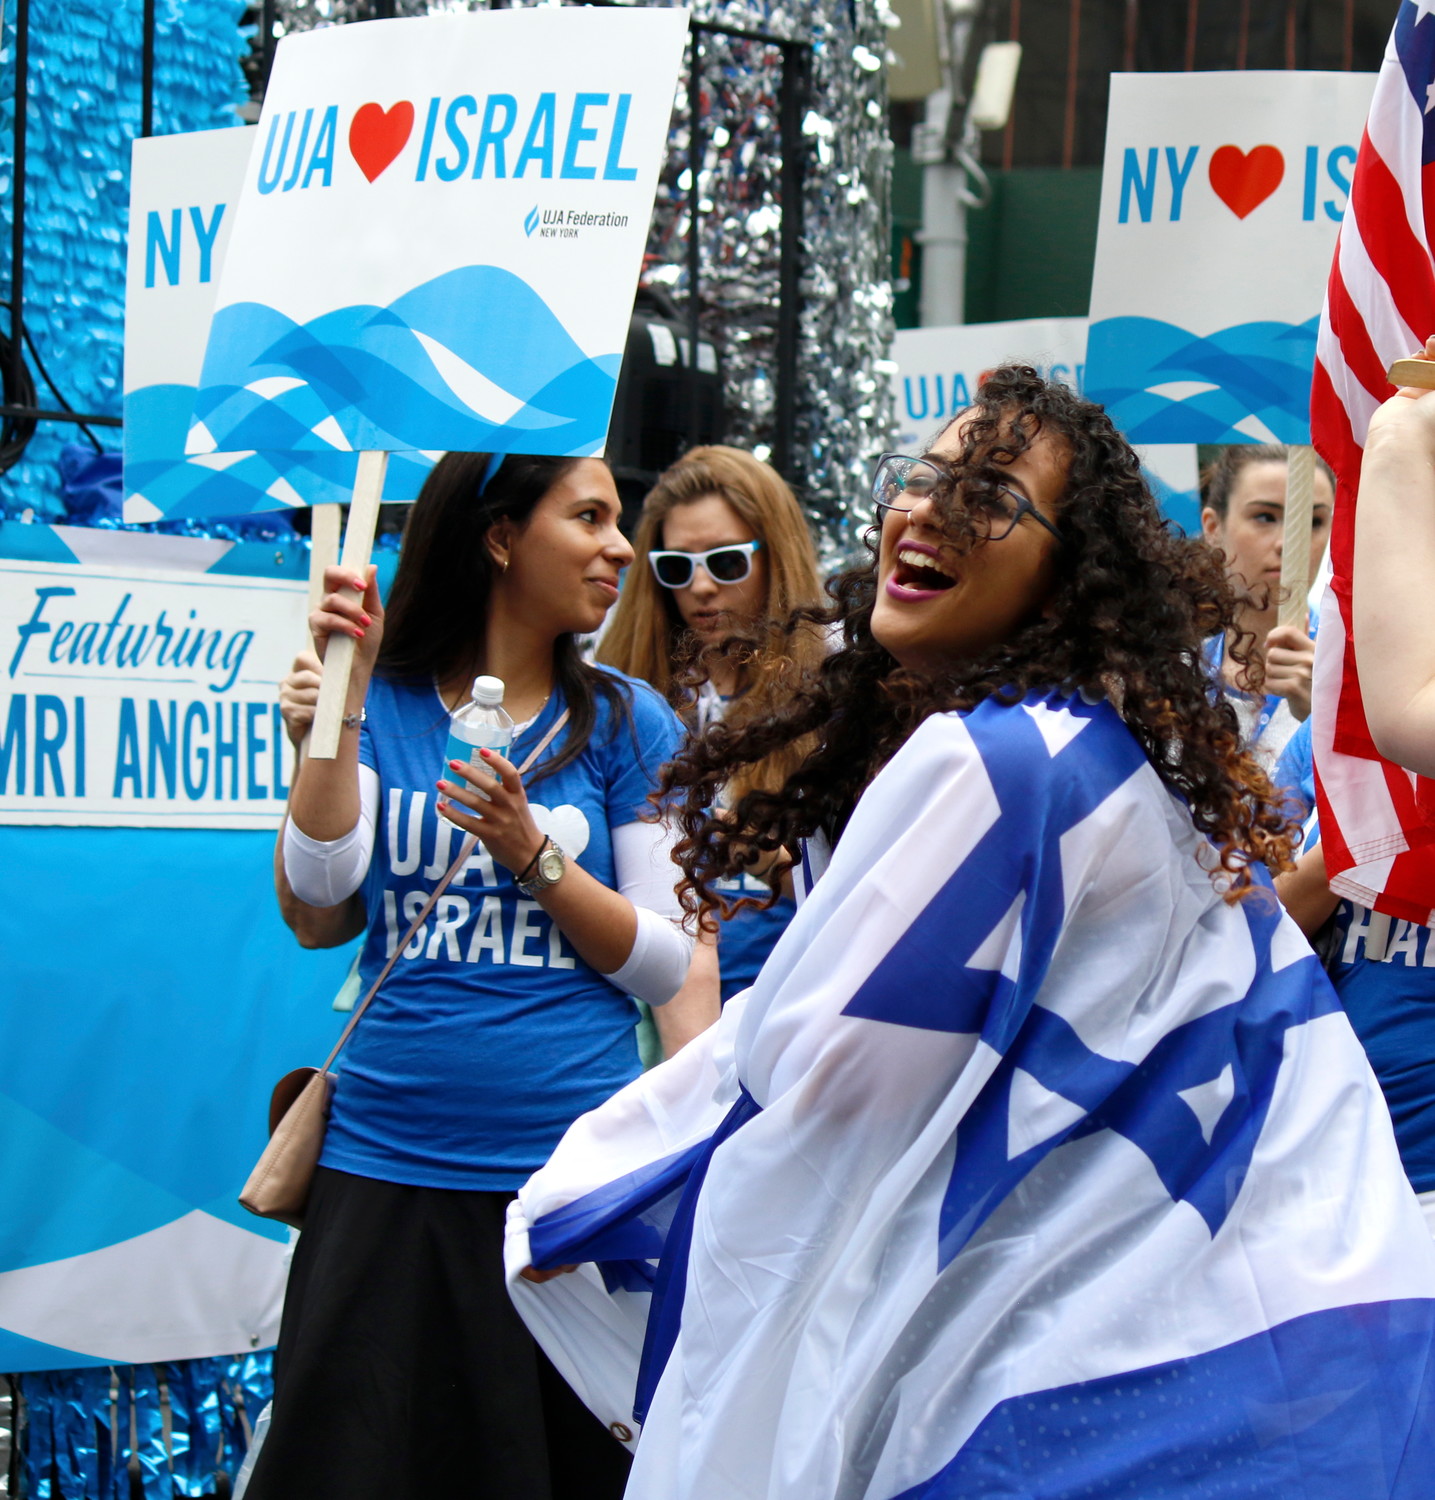 Flags fly as NY celebrates Israel: Marcher from UJA Federation New York shows her blue-and-white.